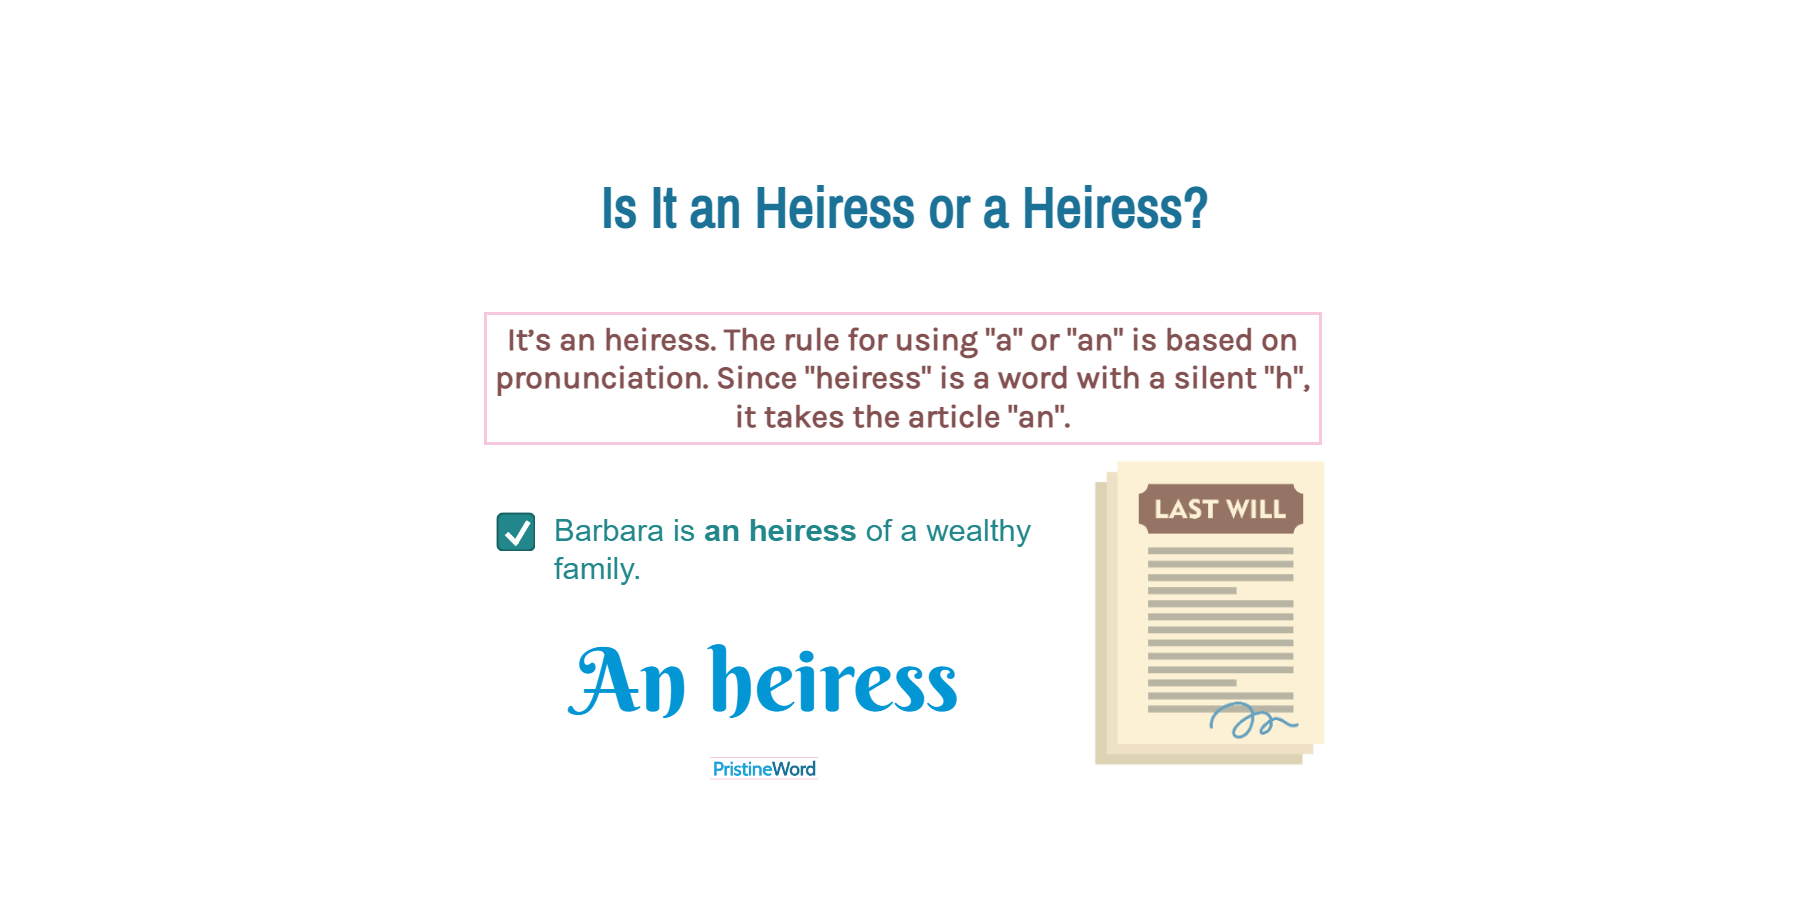 Is It an Heiress or a Heiress?